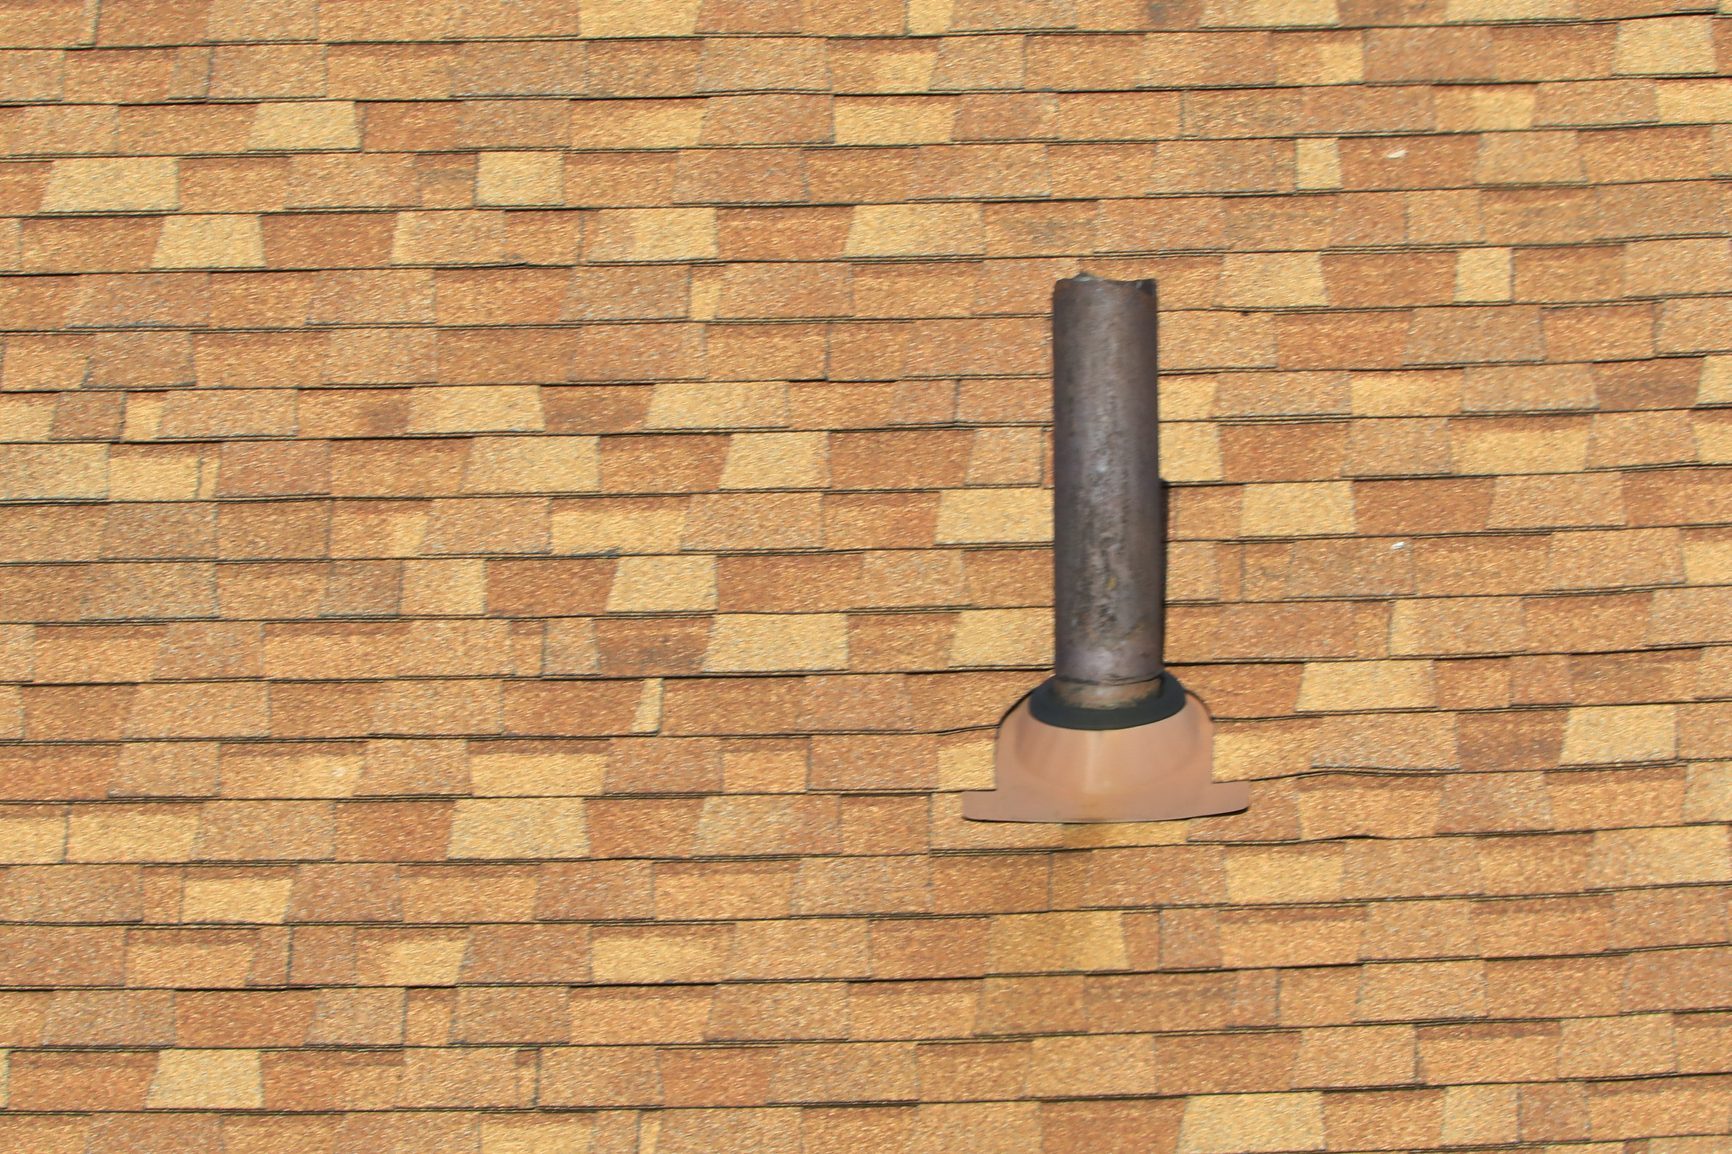 Vent stack for bathroom plumbing gasses and odors on a residential roof